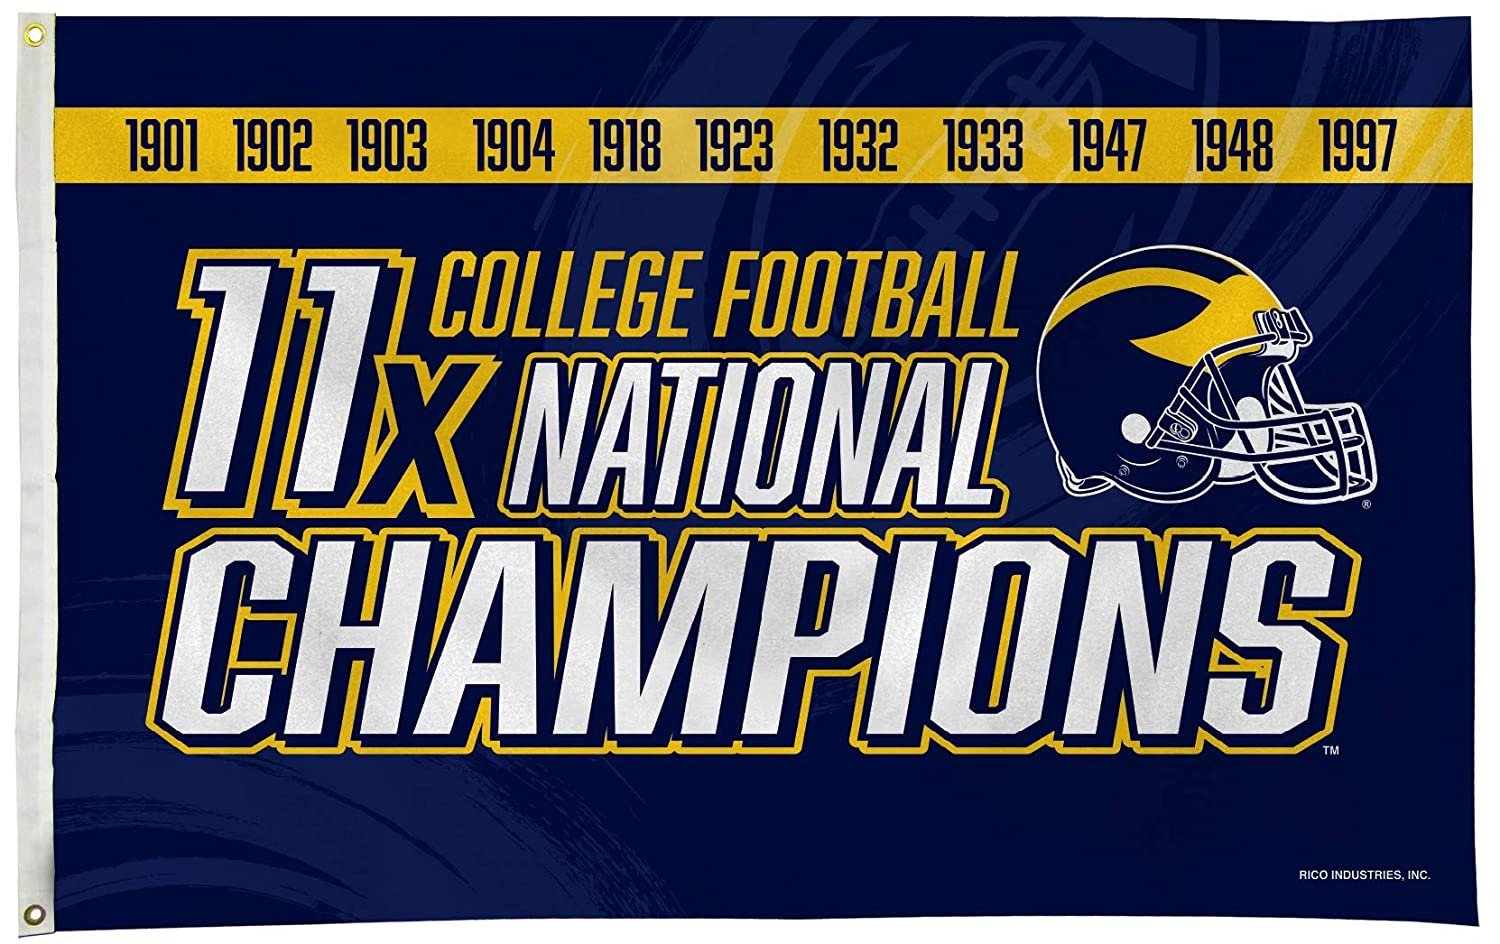 University of Michigan Wolverines 11-Time Champions Premium 3x5 Feet Flag Banner, Metal Grommets, Outdoor Use, Single Sided